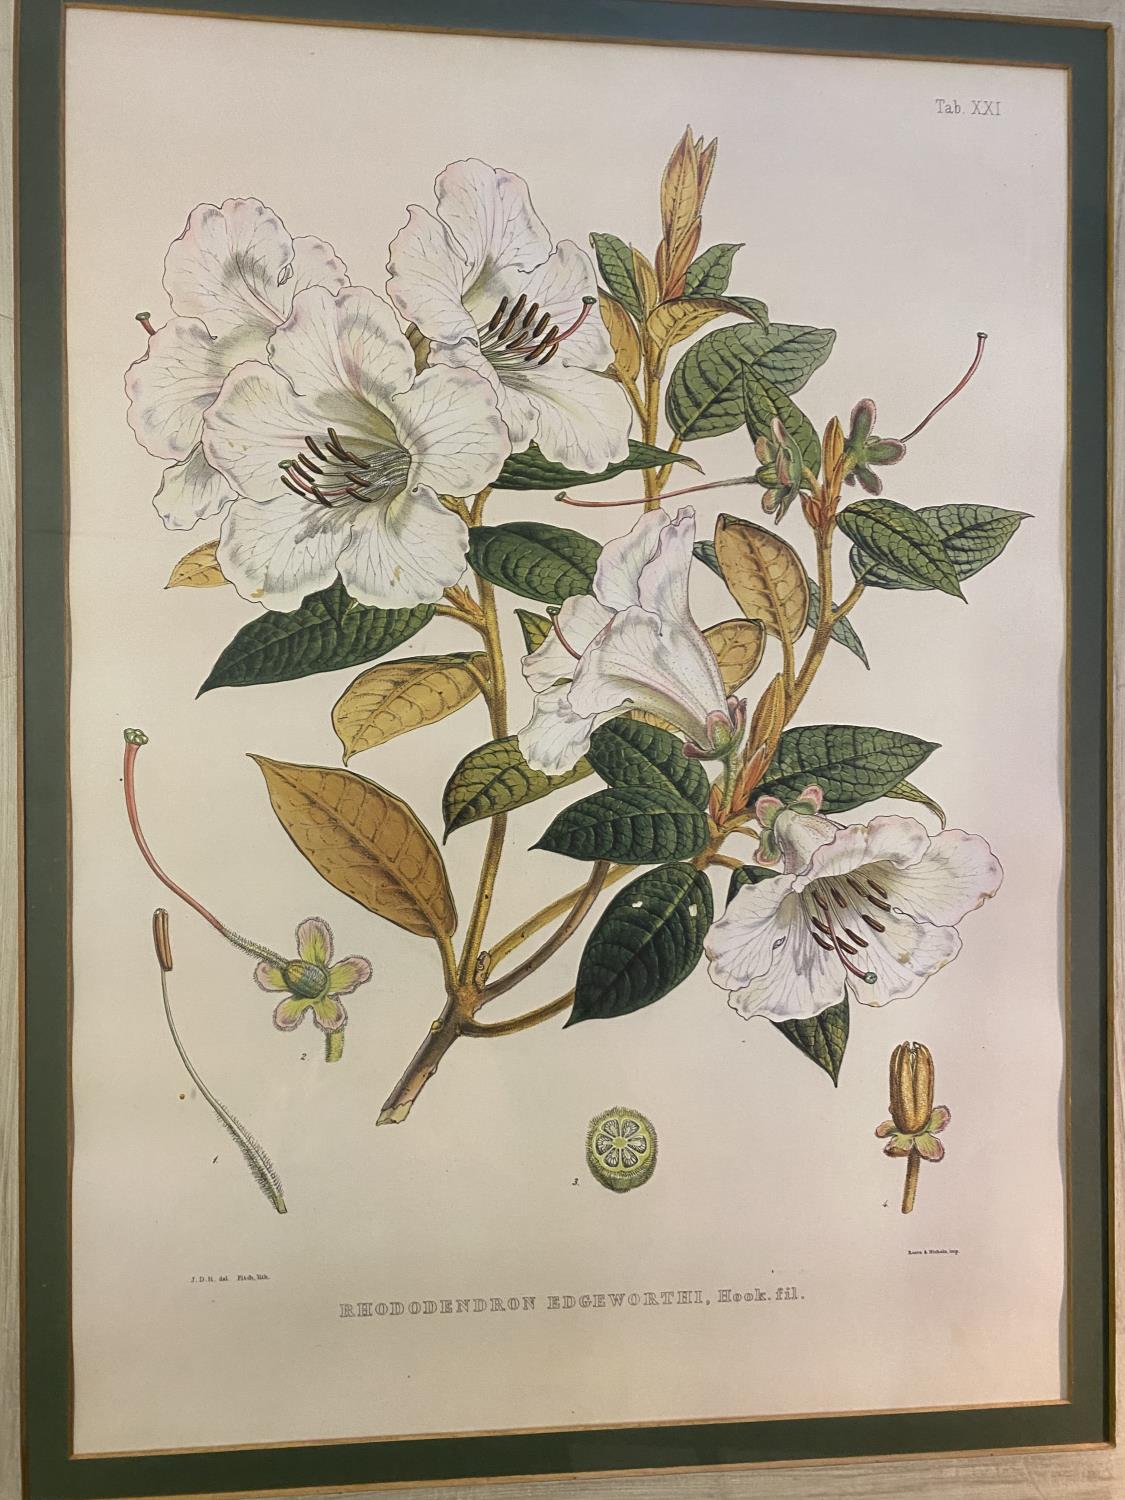 Pair of large Botanical Prints, Rhododendrons, framed and glazed, 95 x 76 including frames cm, faded - Image 2 of 12